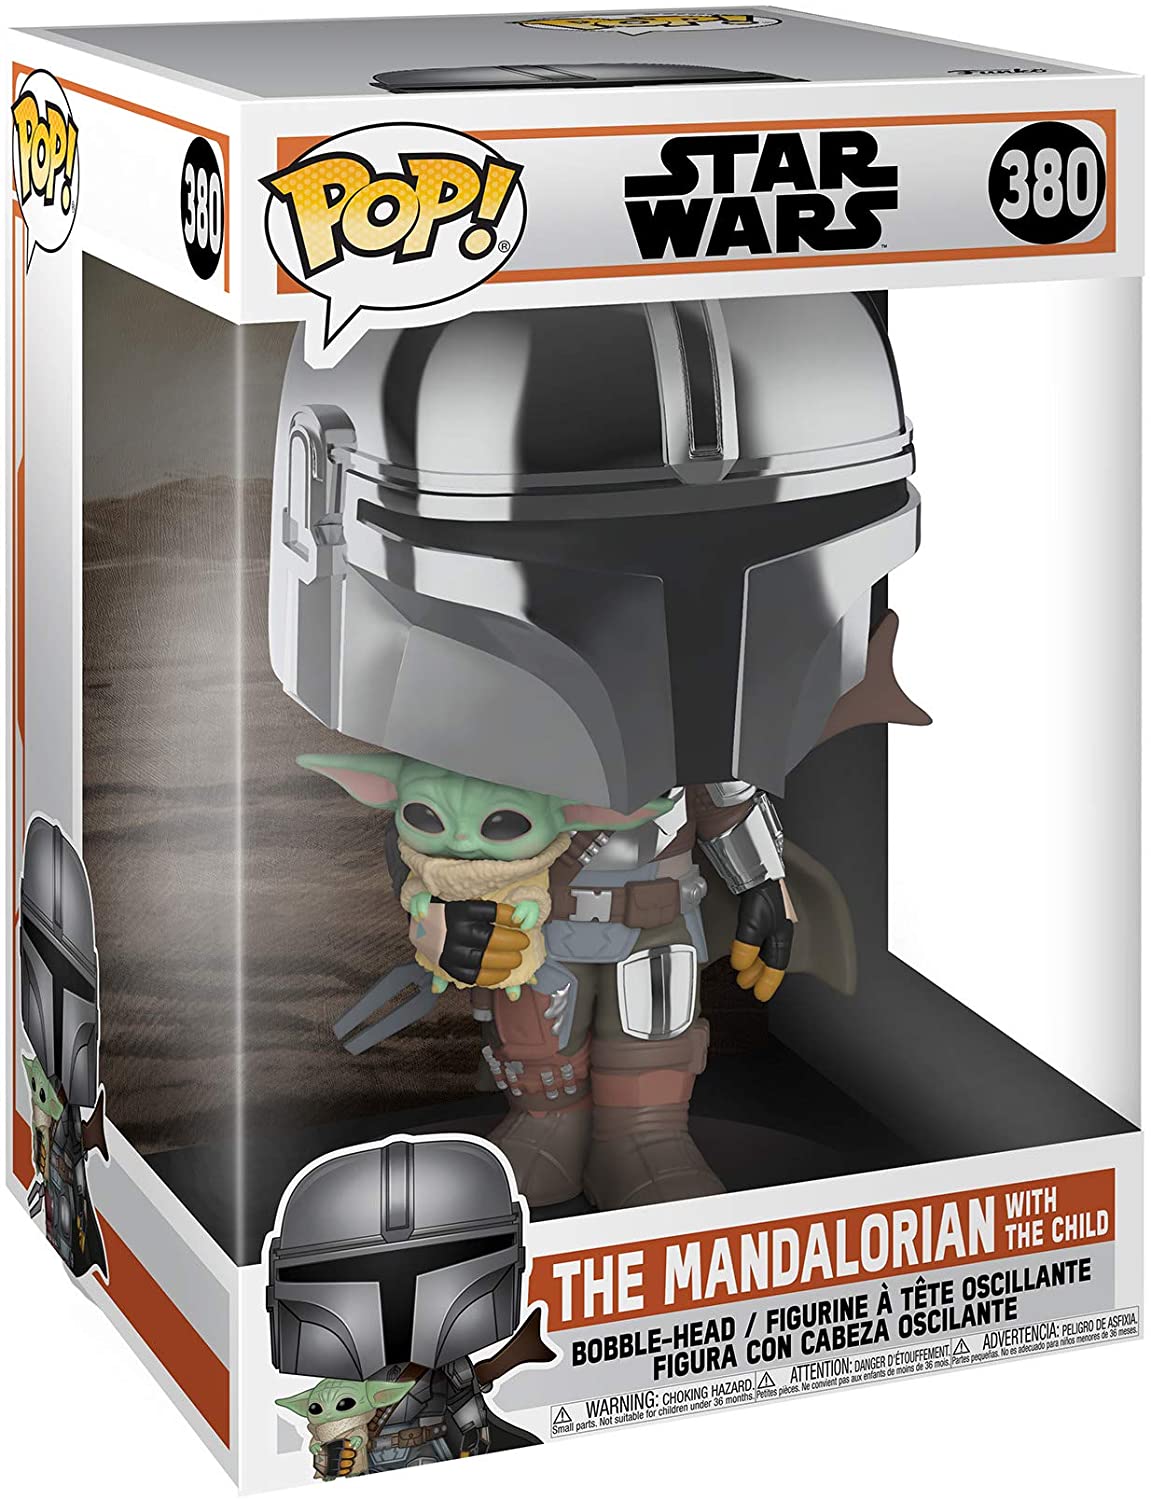 STAR WARS THE MANDALORIAN WITH THE CHILD LIFE SIZE #380 POP